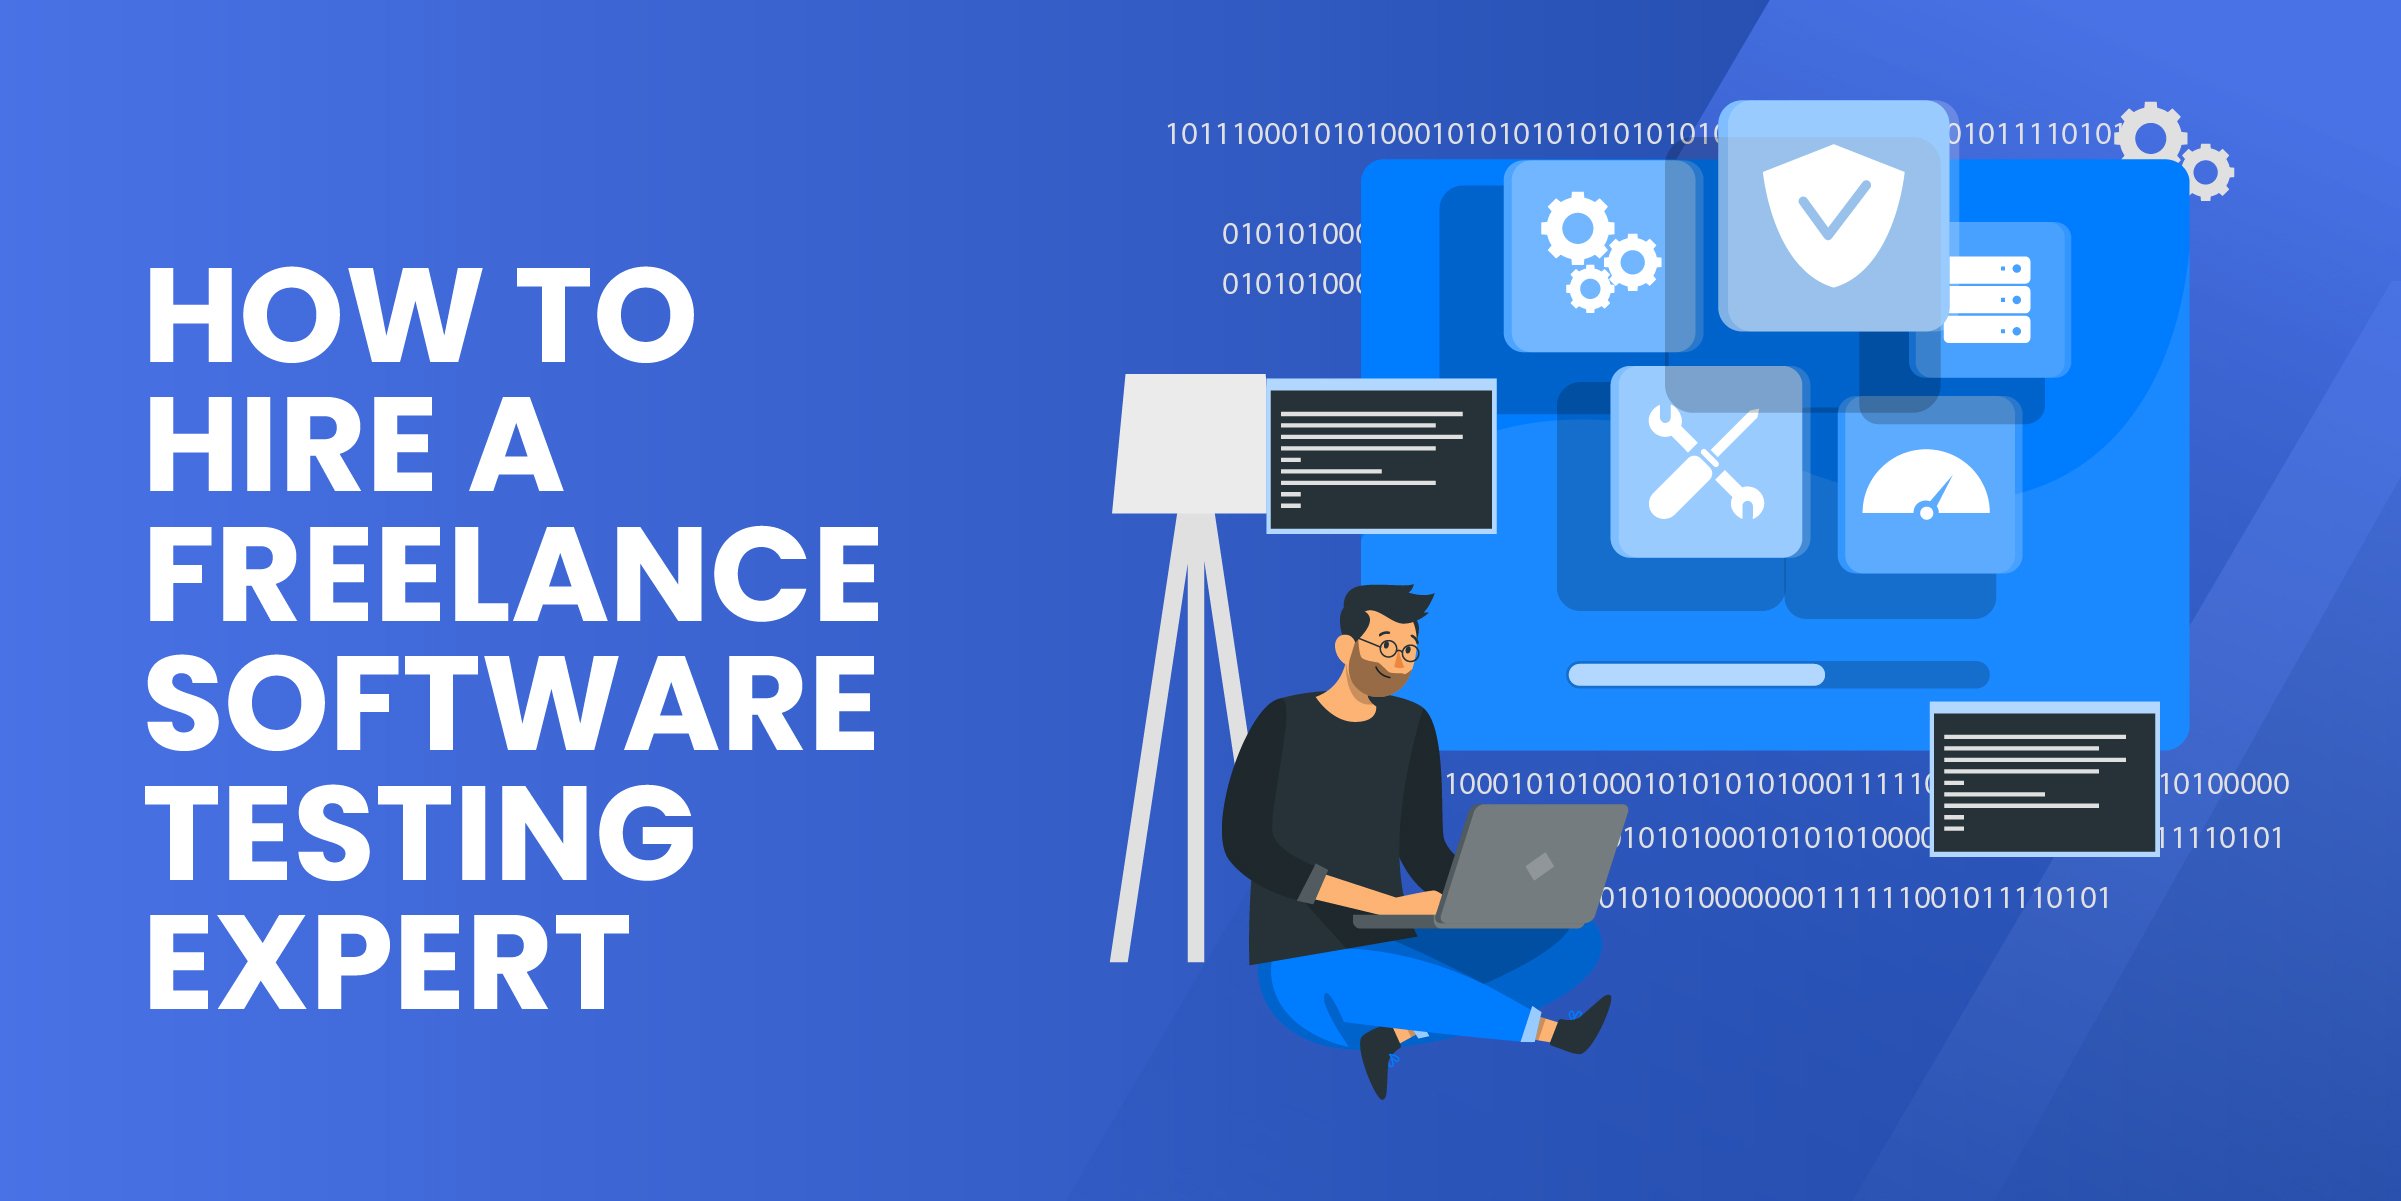 How to Hire Freelance Software Tester